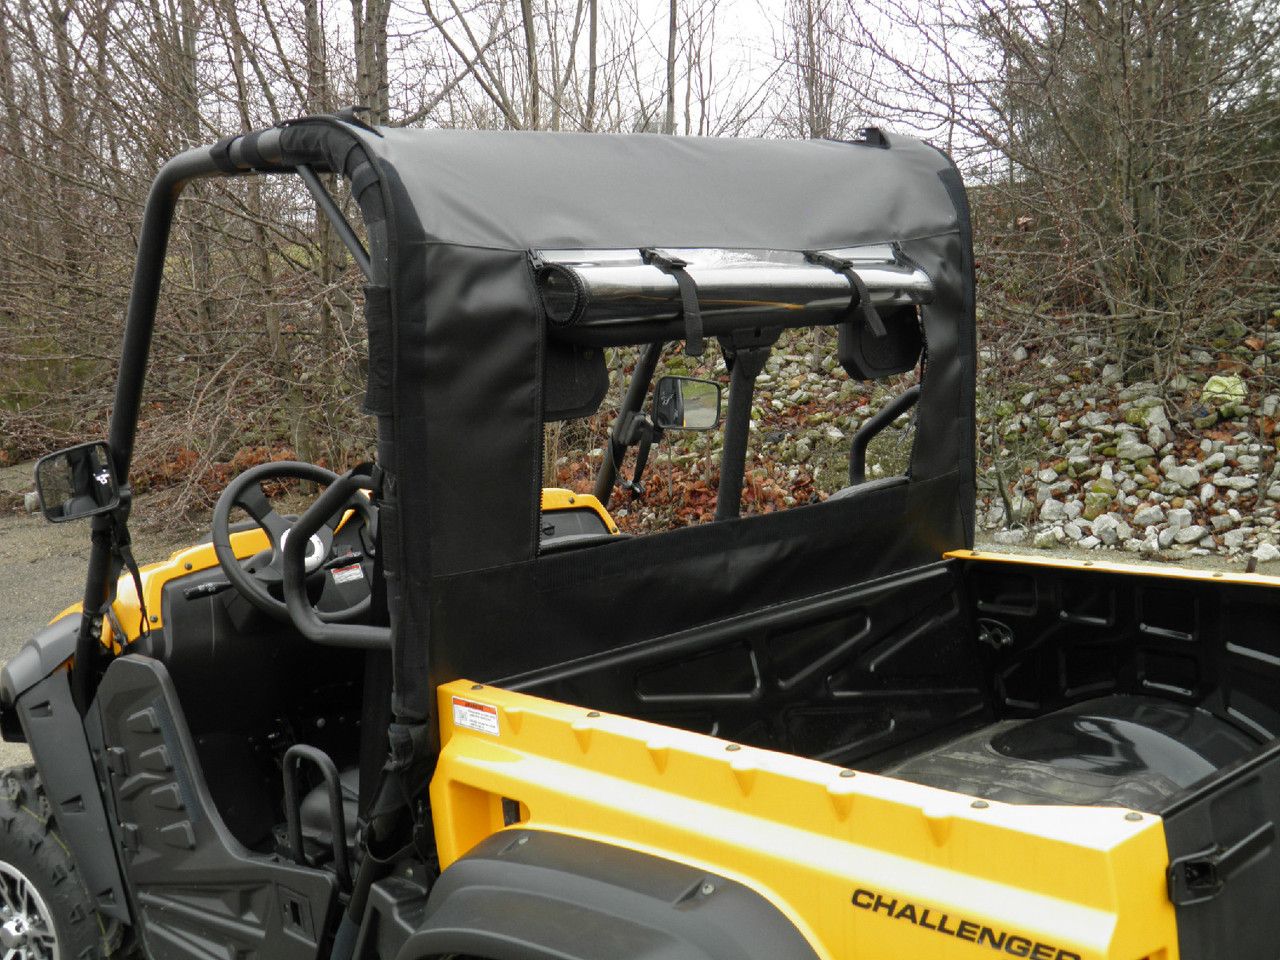 3 Star side x side Cub Cadet Challenger 500/700 doors and rear window rear angle view close up